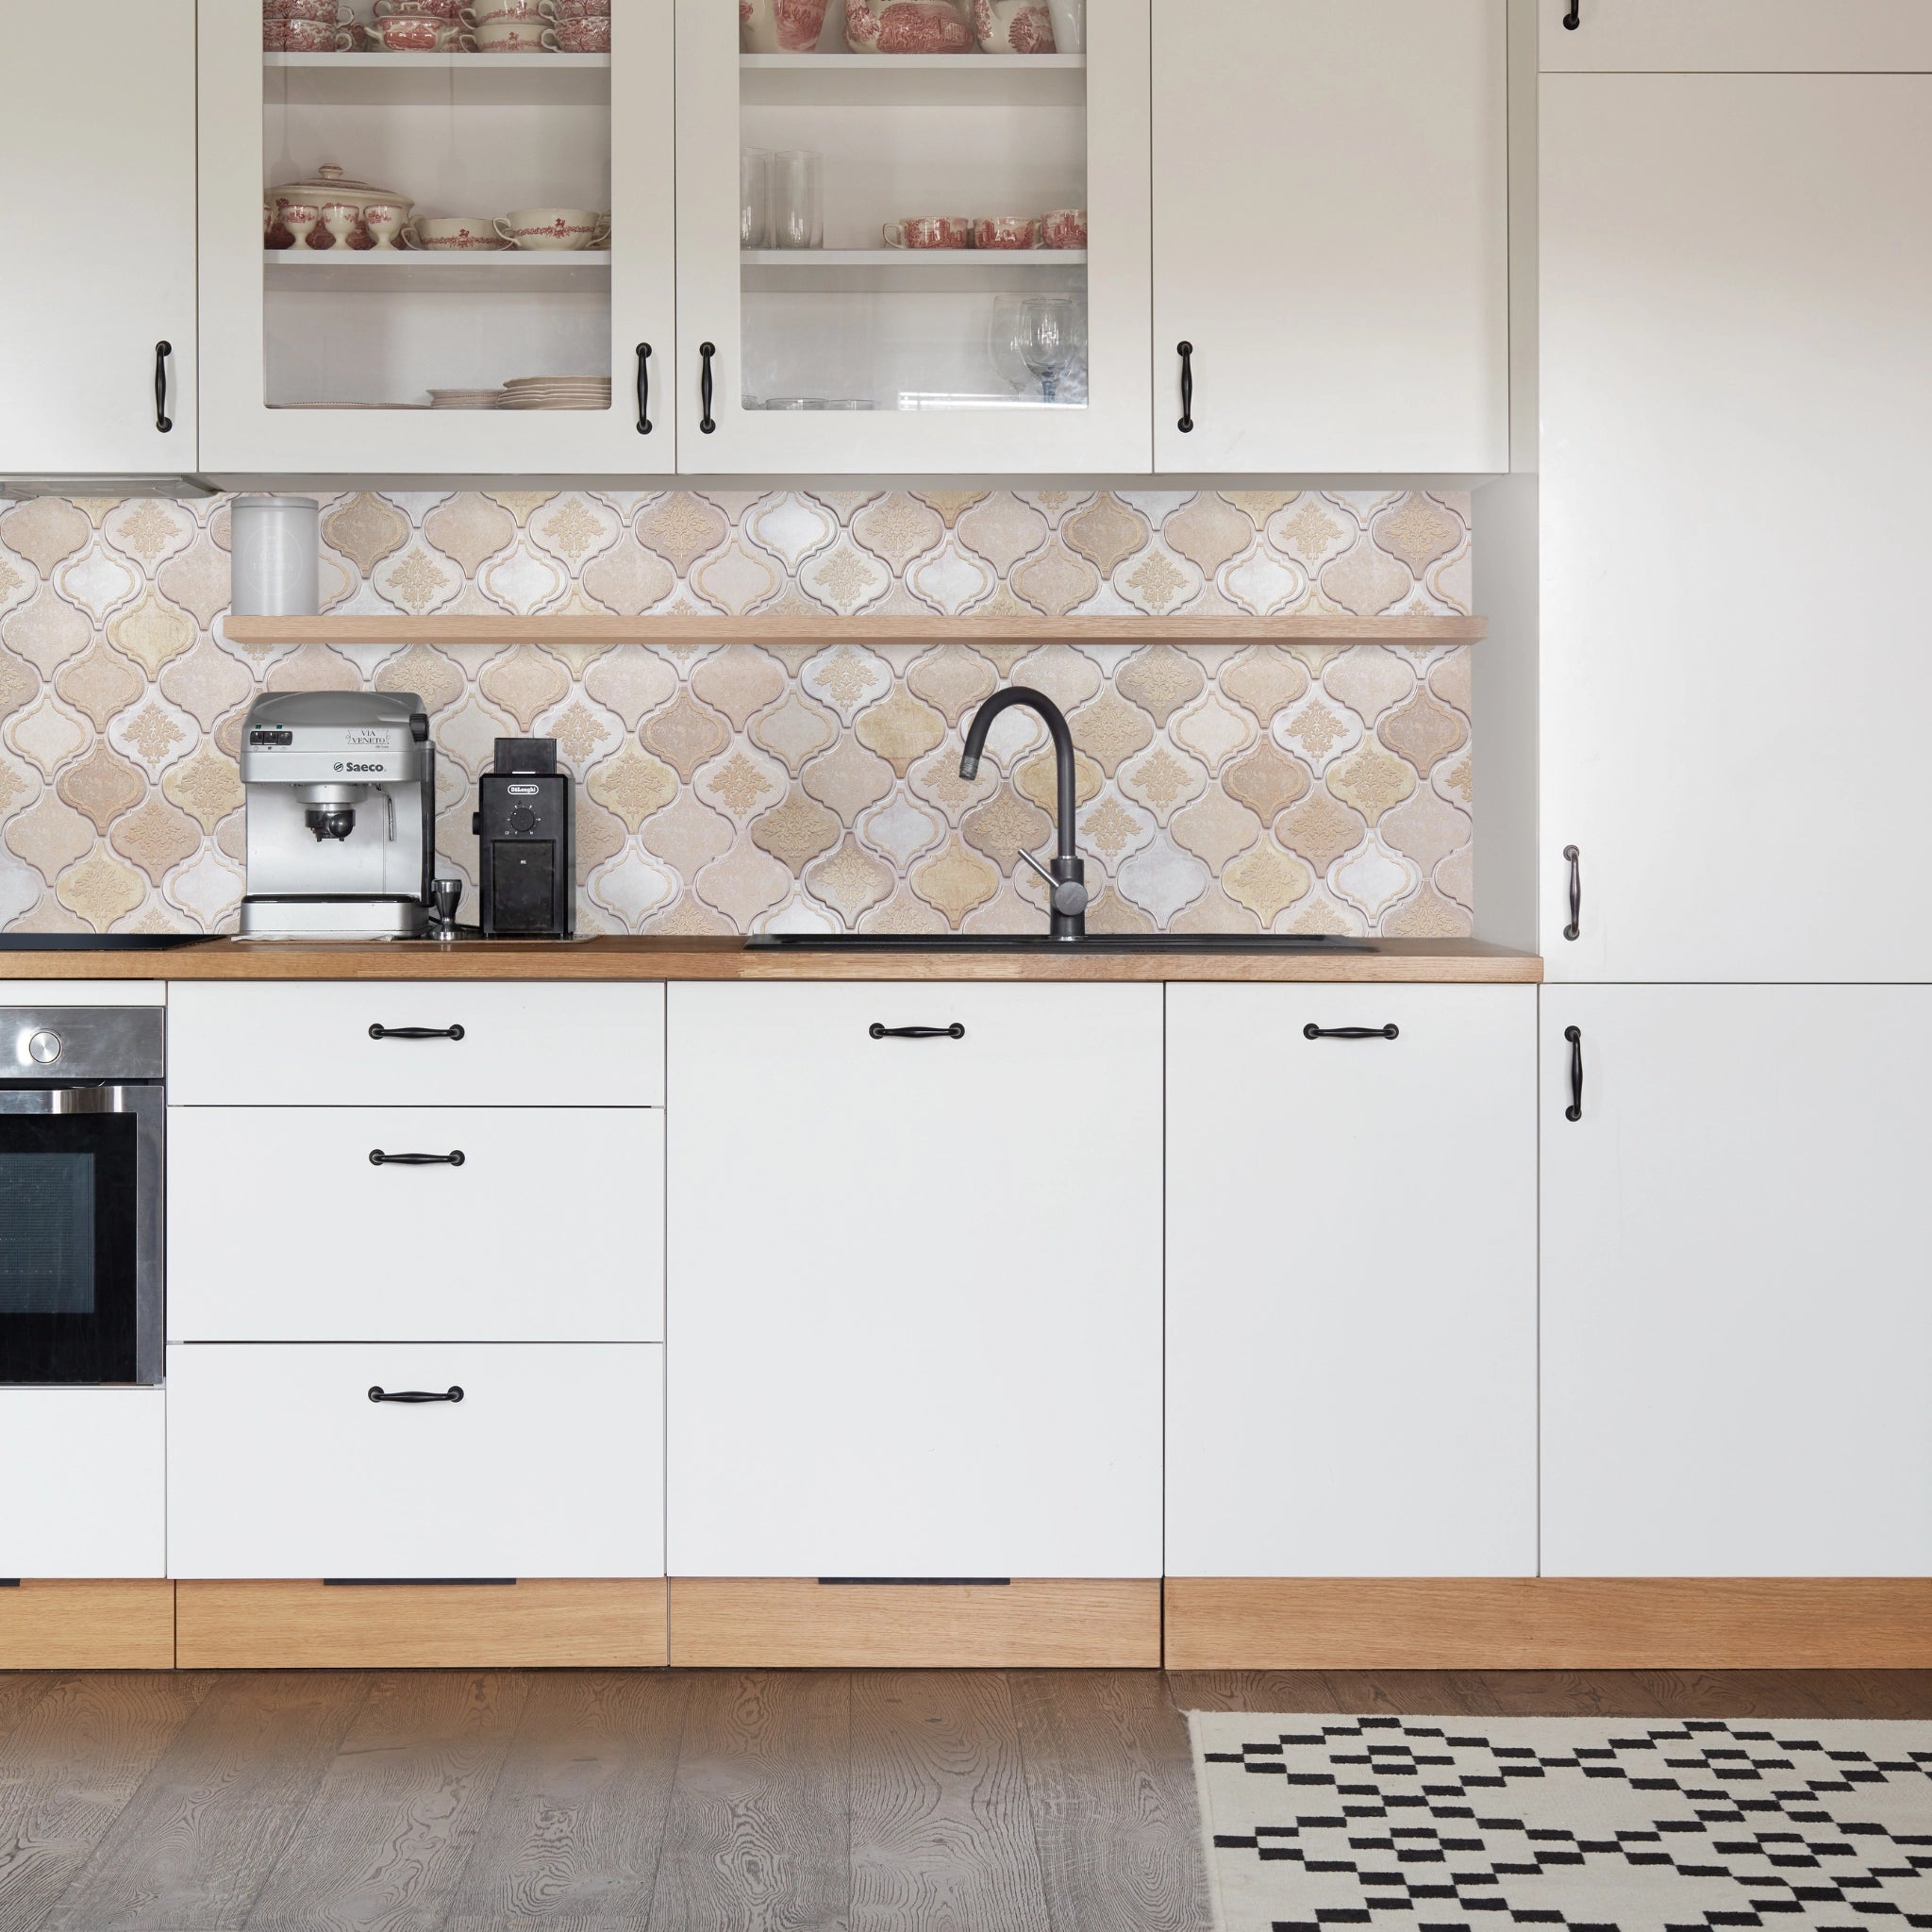 Kitchen with beige geometric-patterned wall panels and modern decor